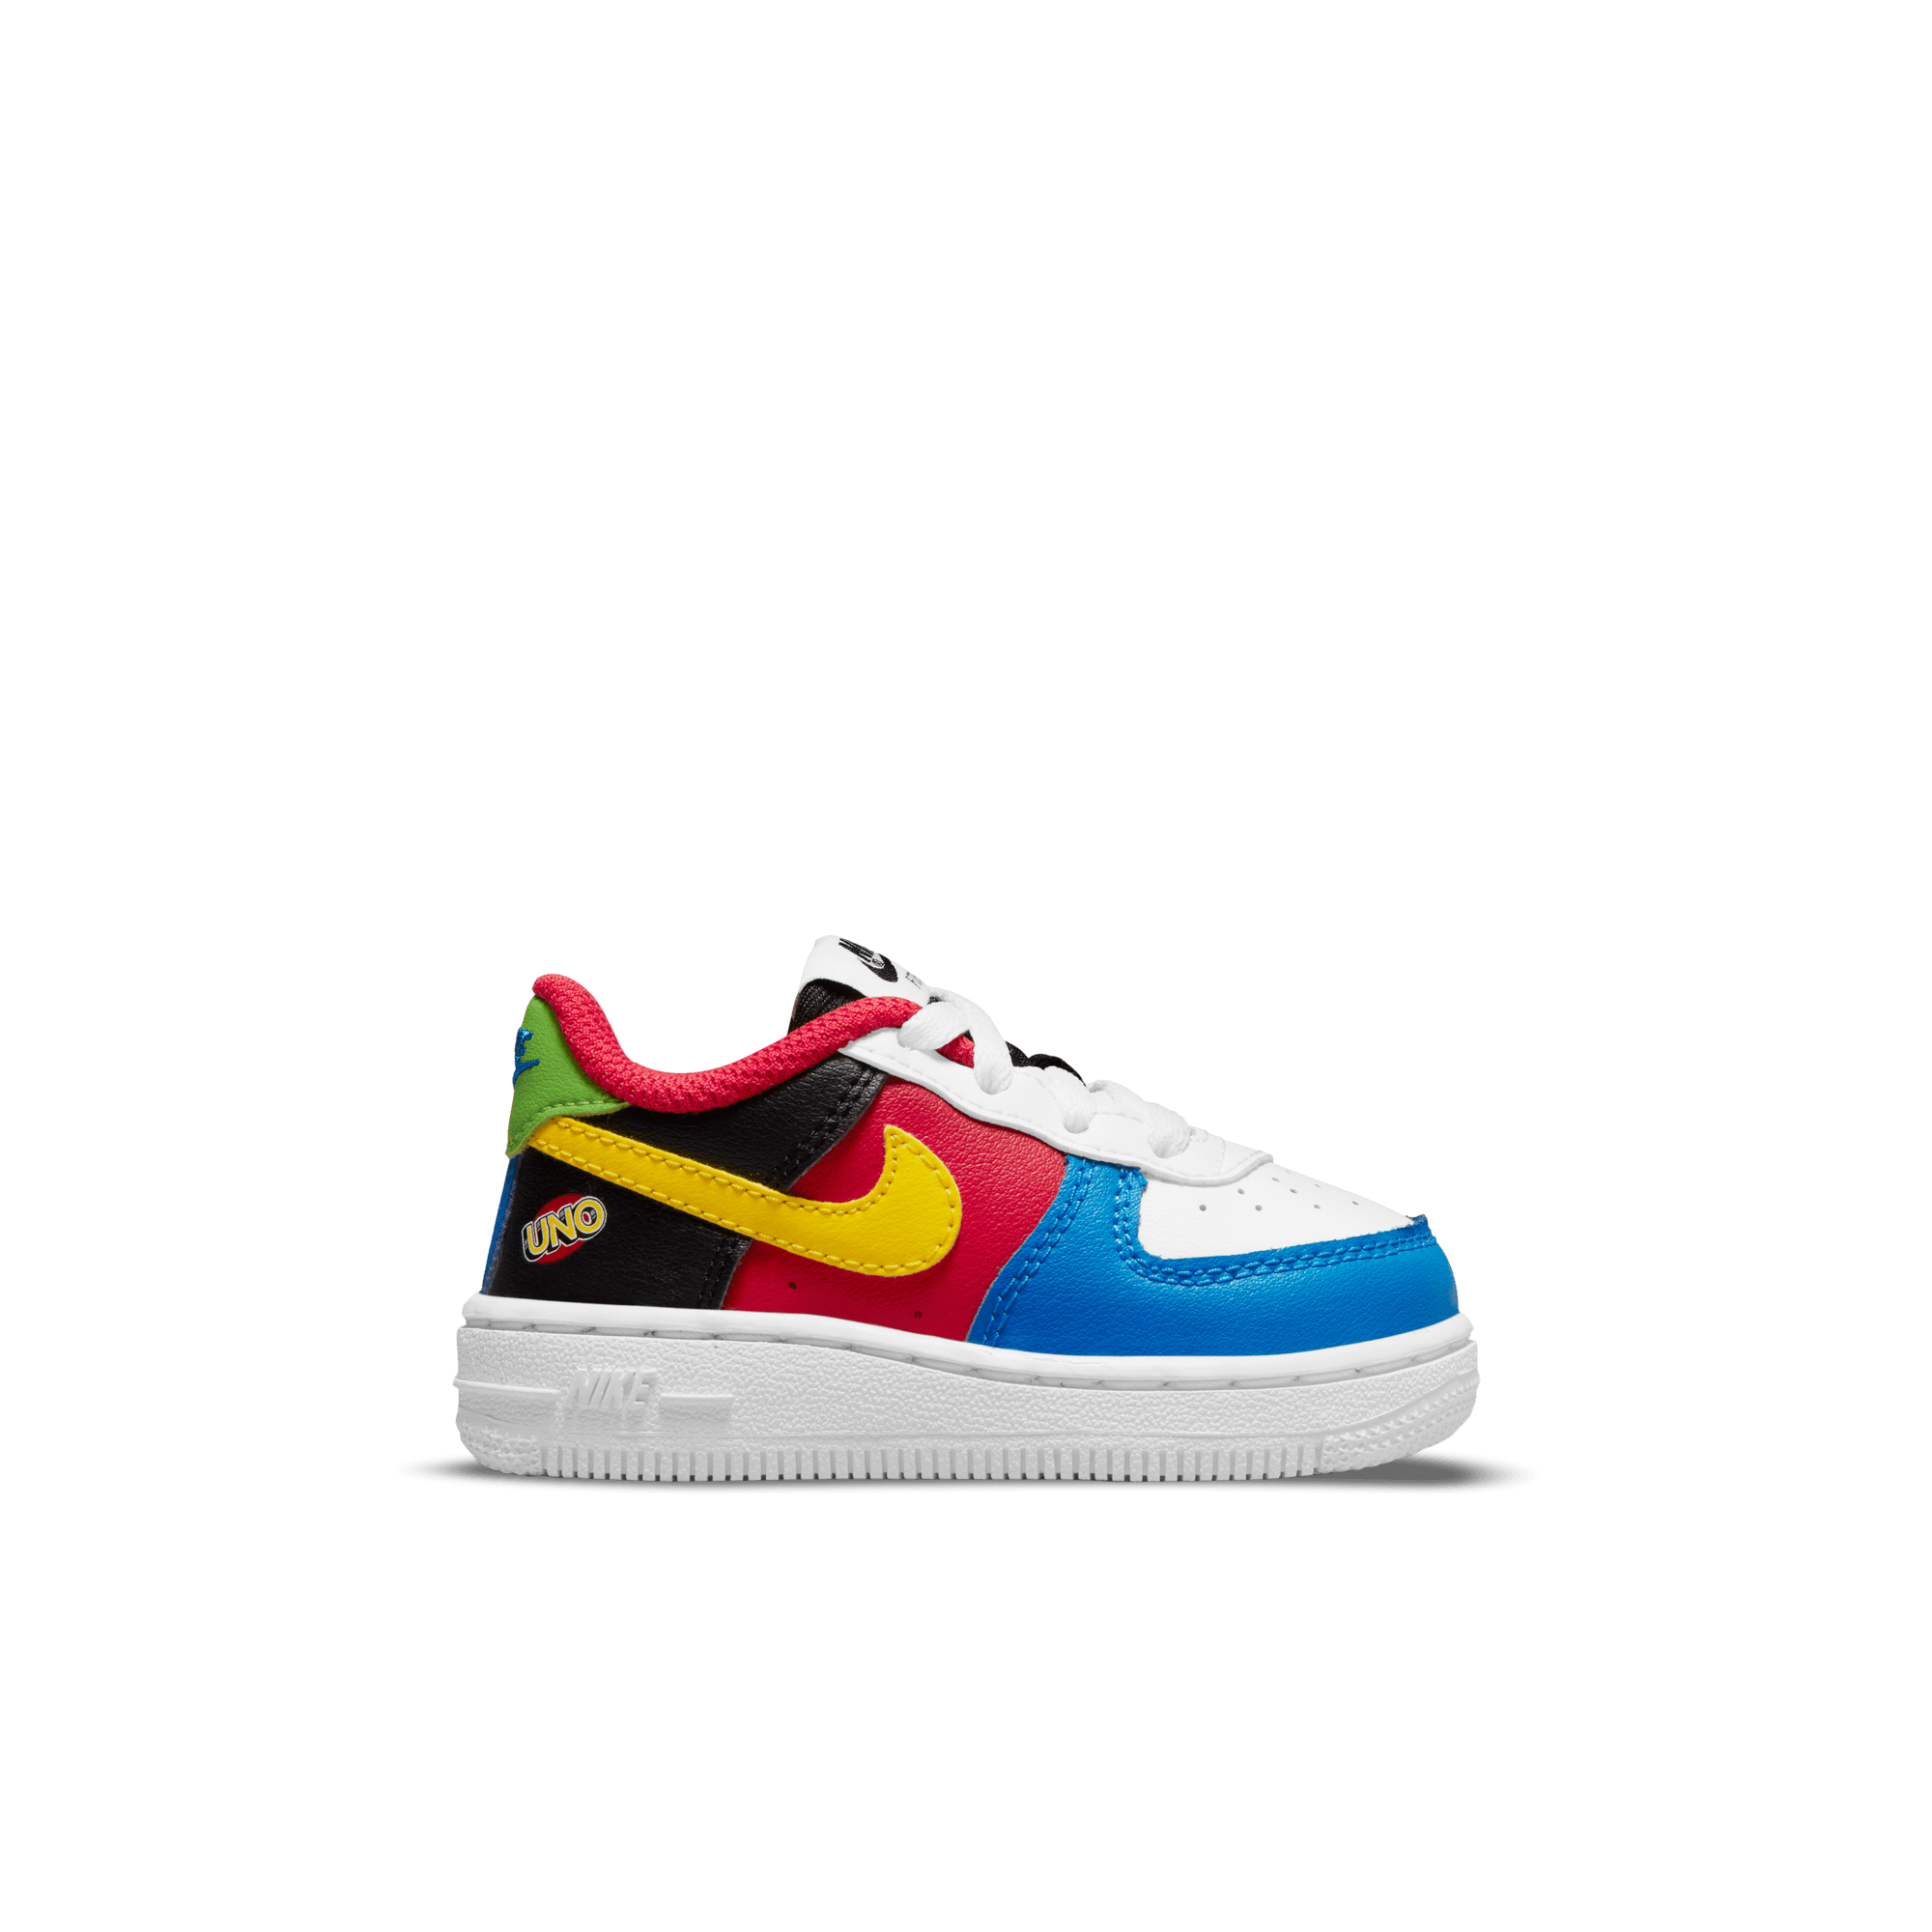 Nike Air Force 1 Low LV8 'UNO' (TD)